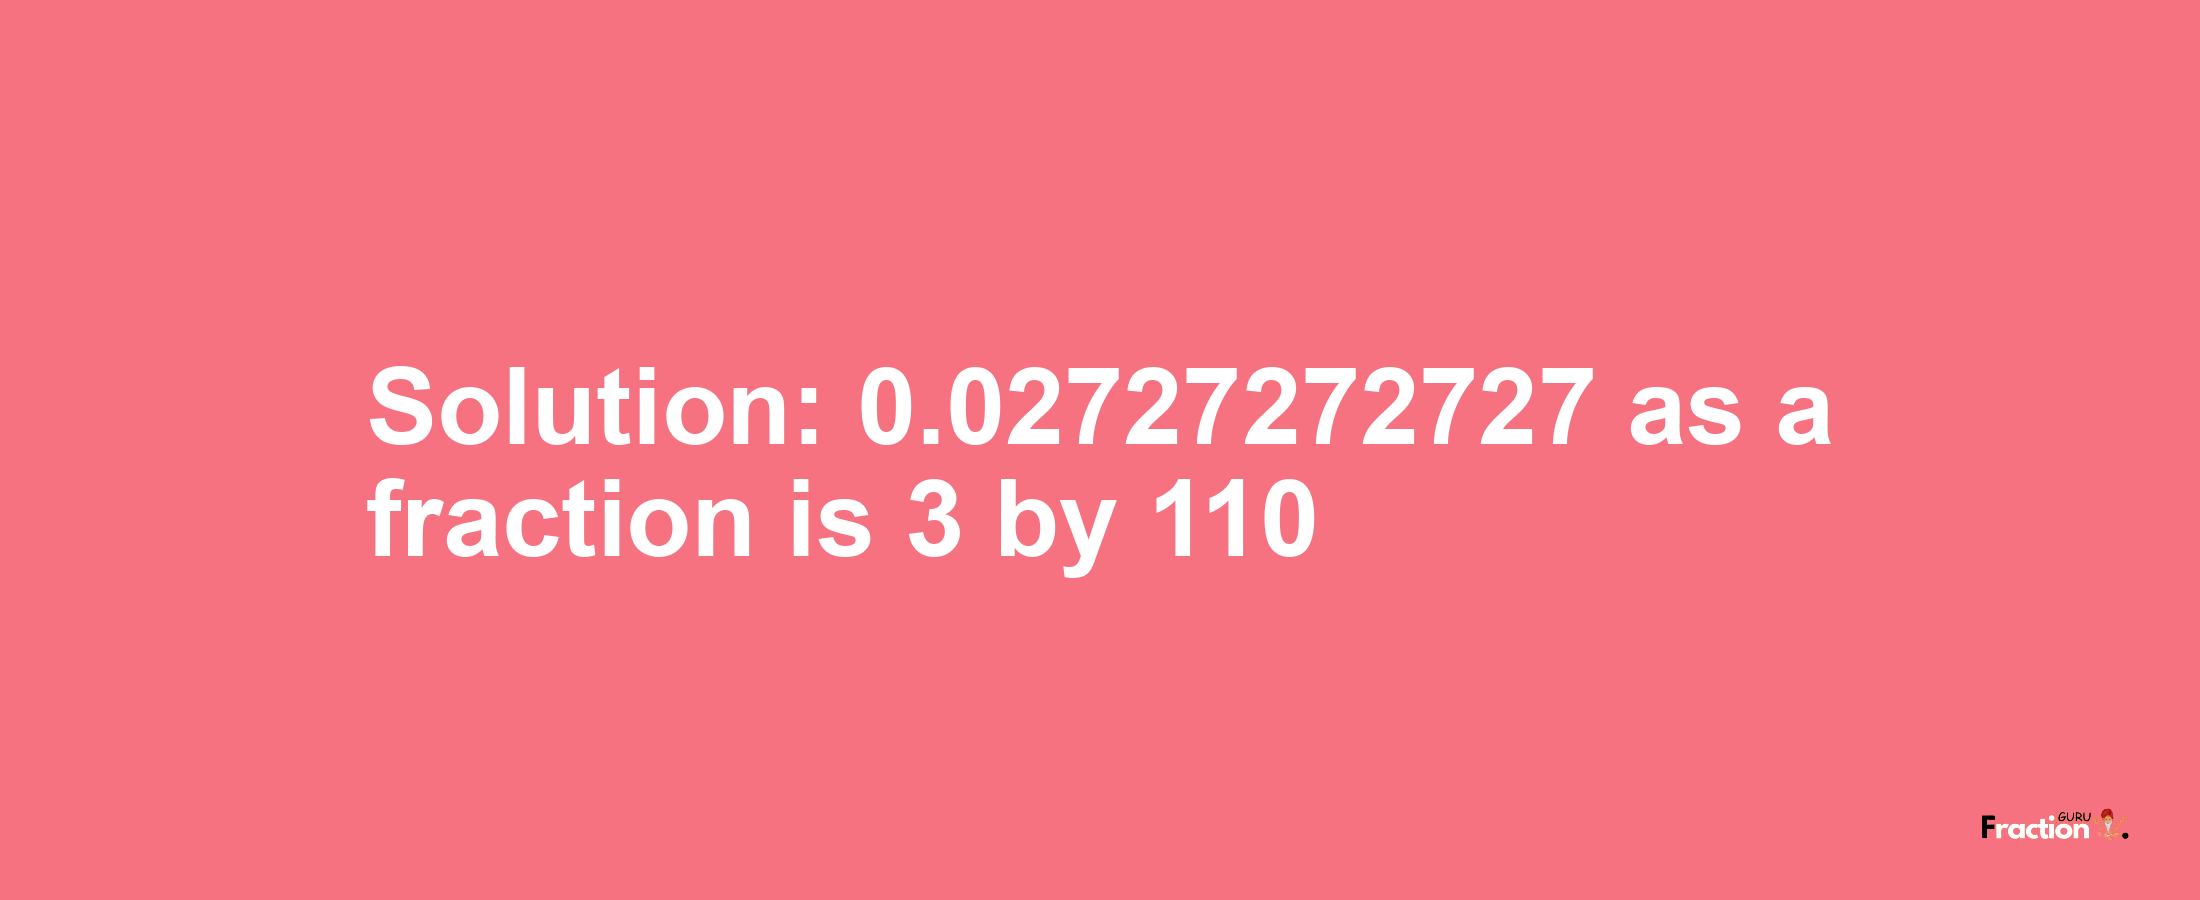 Solution:0.02727272727 as a fraction is 3/110